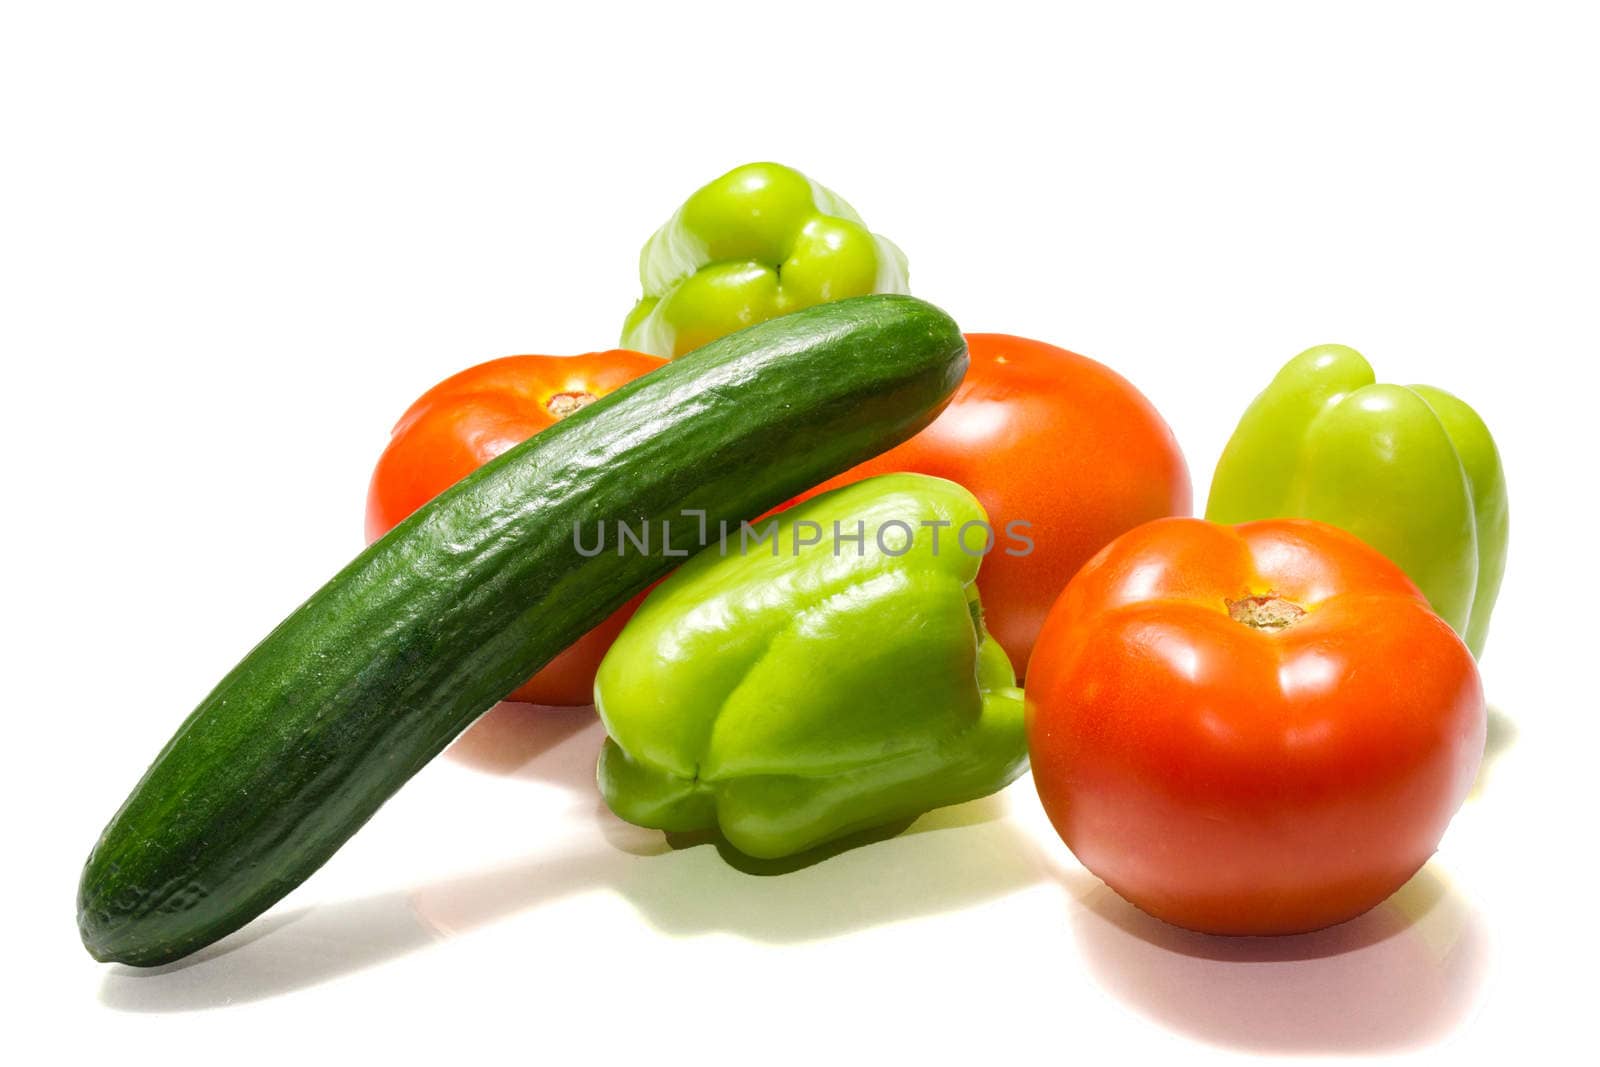 The photo shows vegetables on a white background